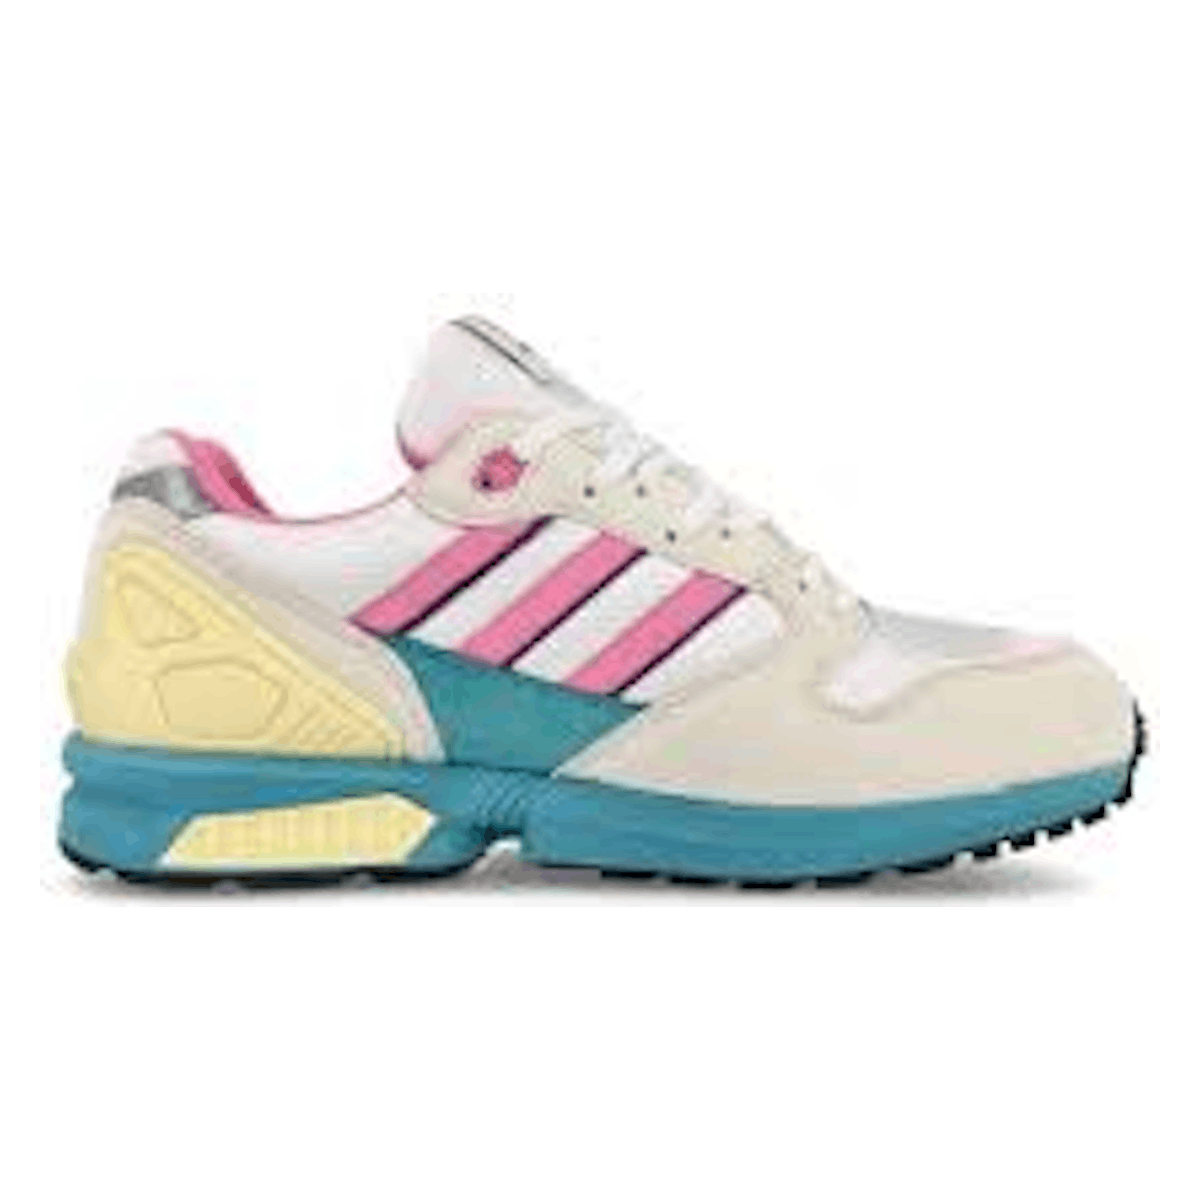 Adidas ZX 5020 "Bliss Pink"